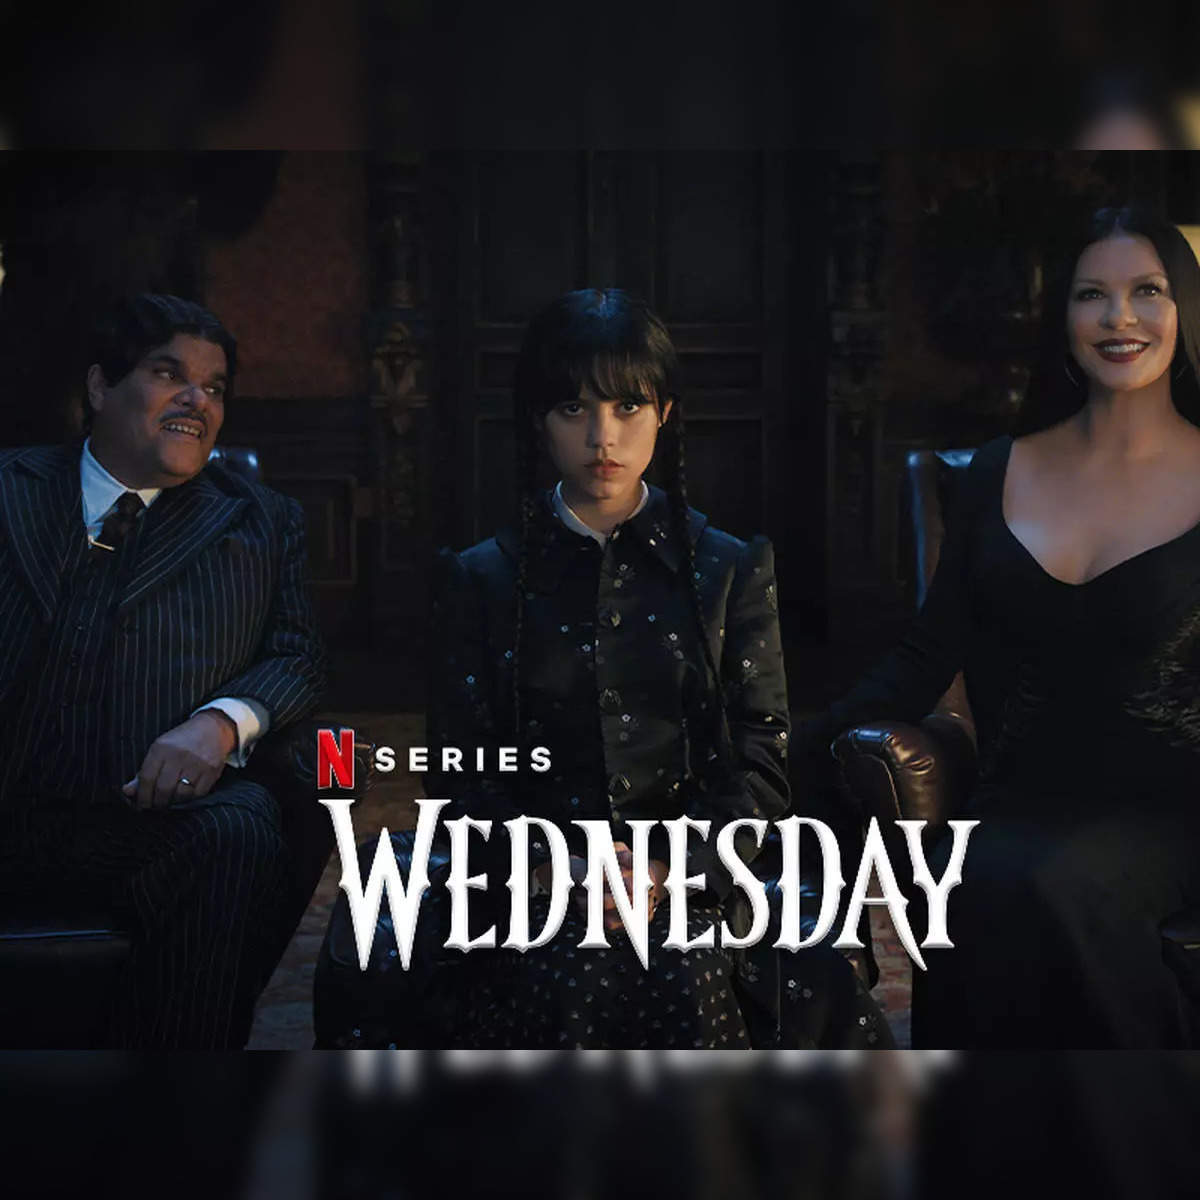 Wednesday Season 2: Wednesday Season 2: This is what you may want